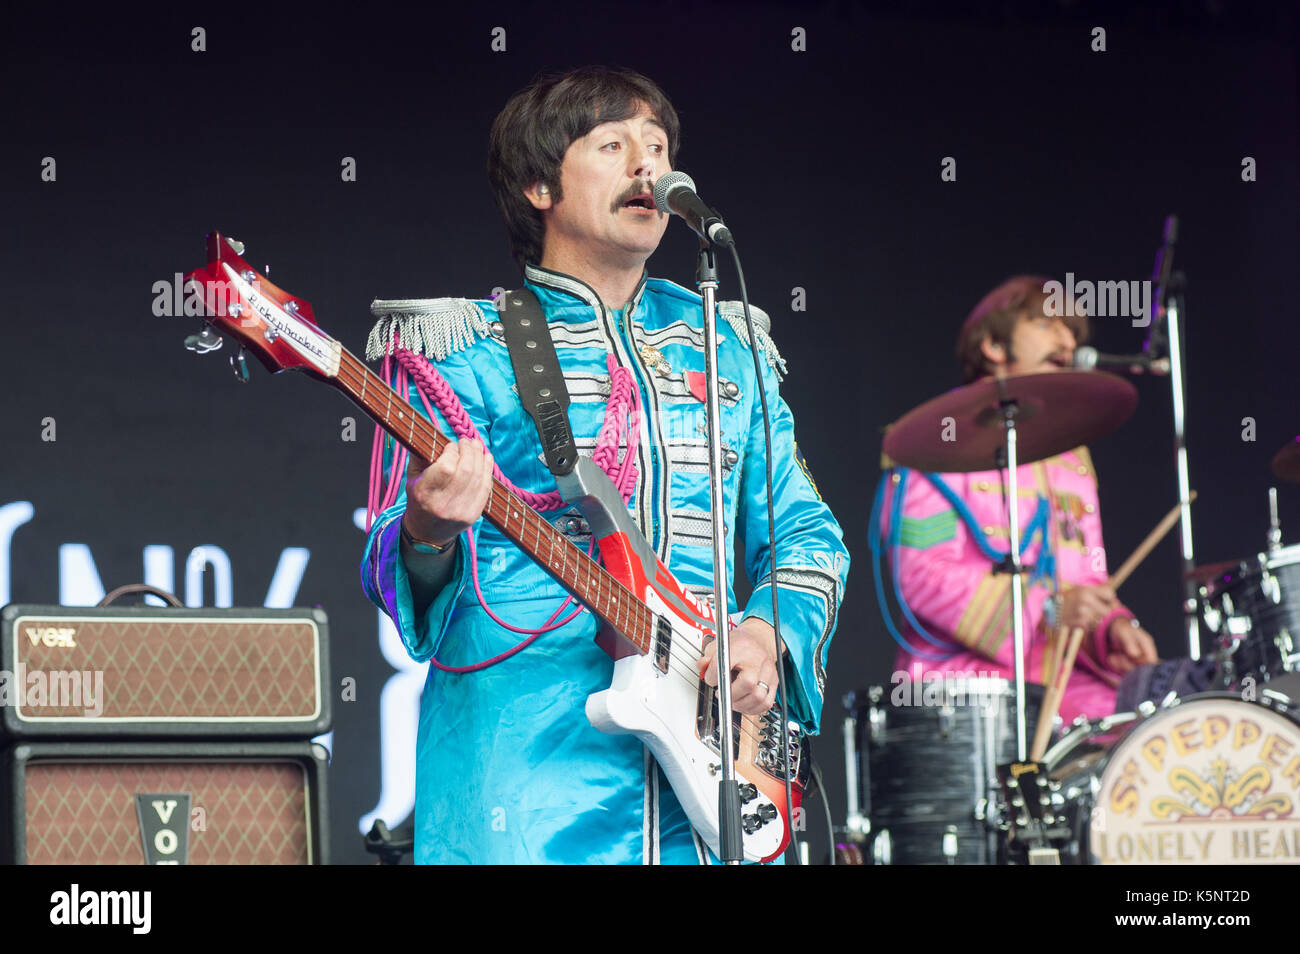 Sergeant Peppers Stock Photos & Sergeant Peppers Stock Images - Alamy